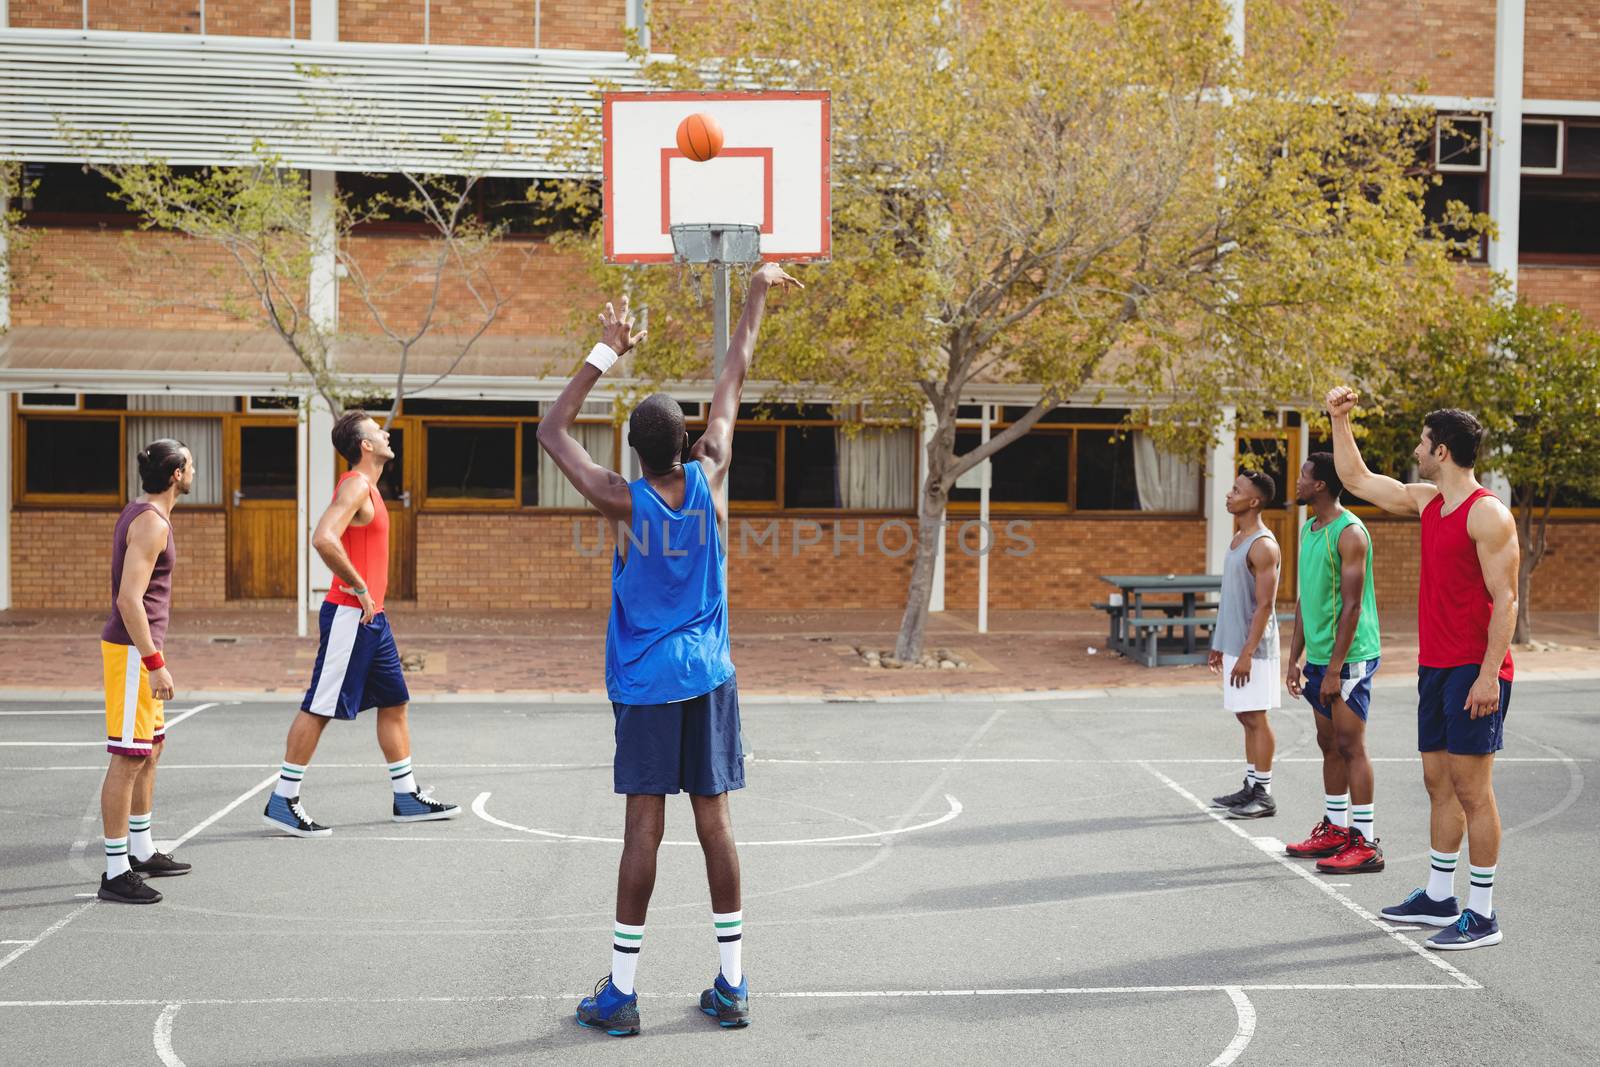 Basketball player taking a penalty shot by Wavebreakmedia